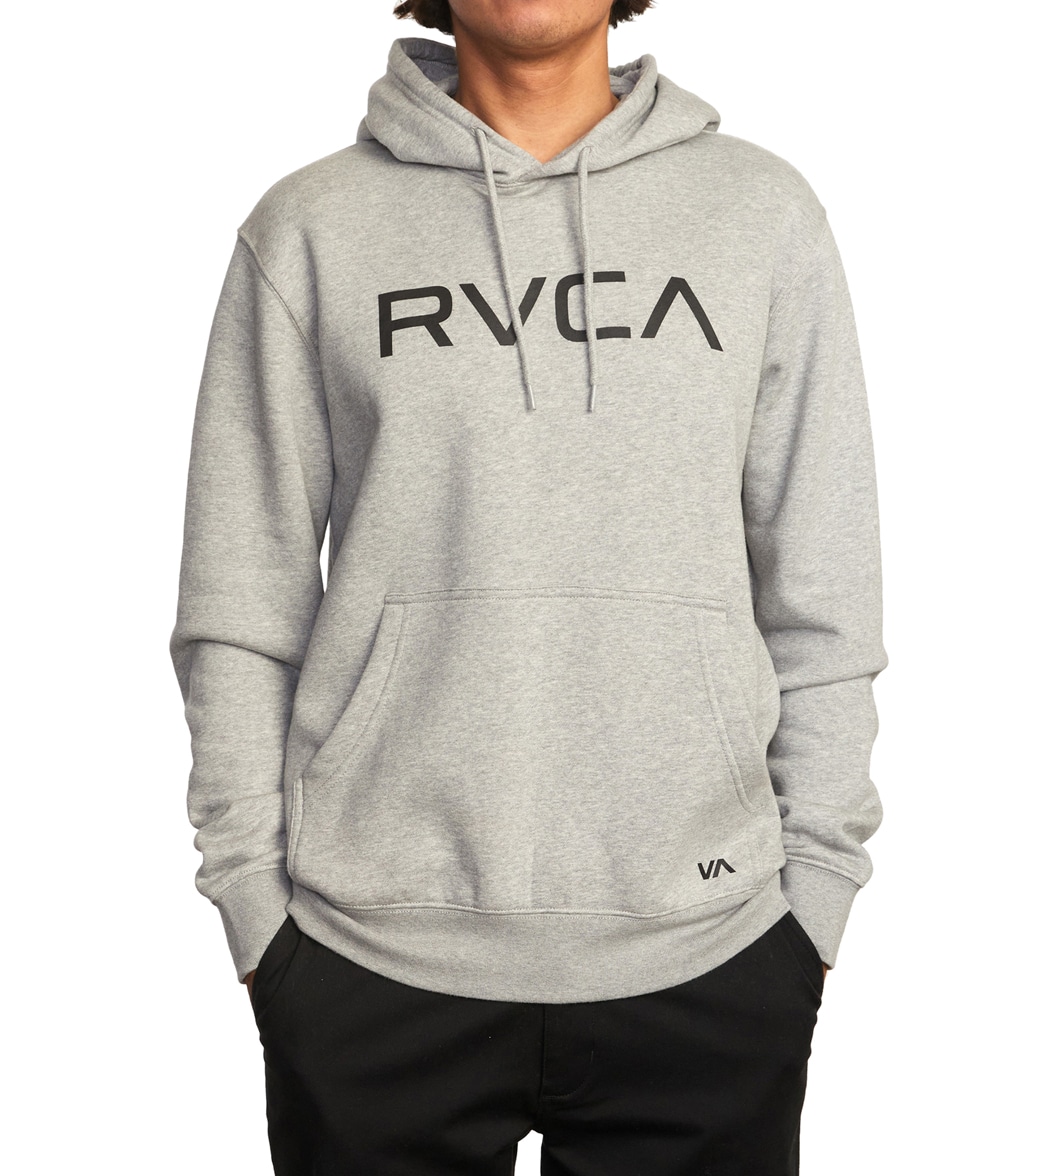 Men's Big Rvca Hoodie - Athletic Heather Large Cotton/Polyester - Swimoutlet.com